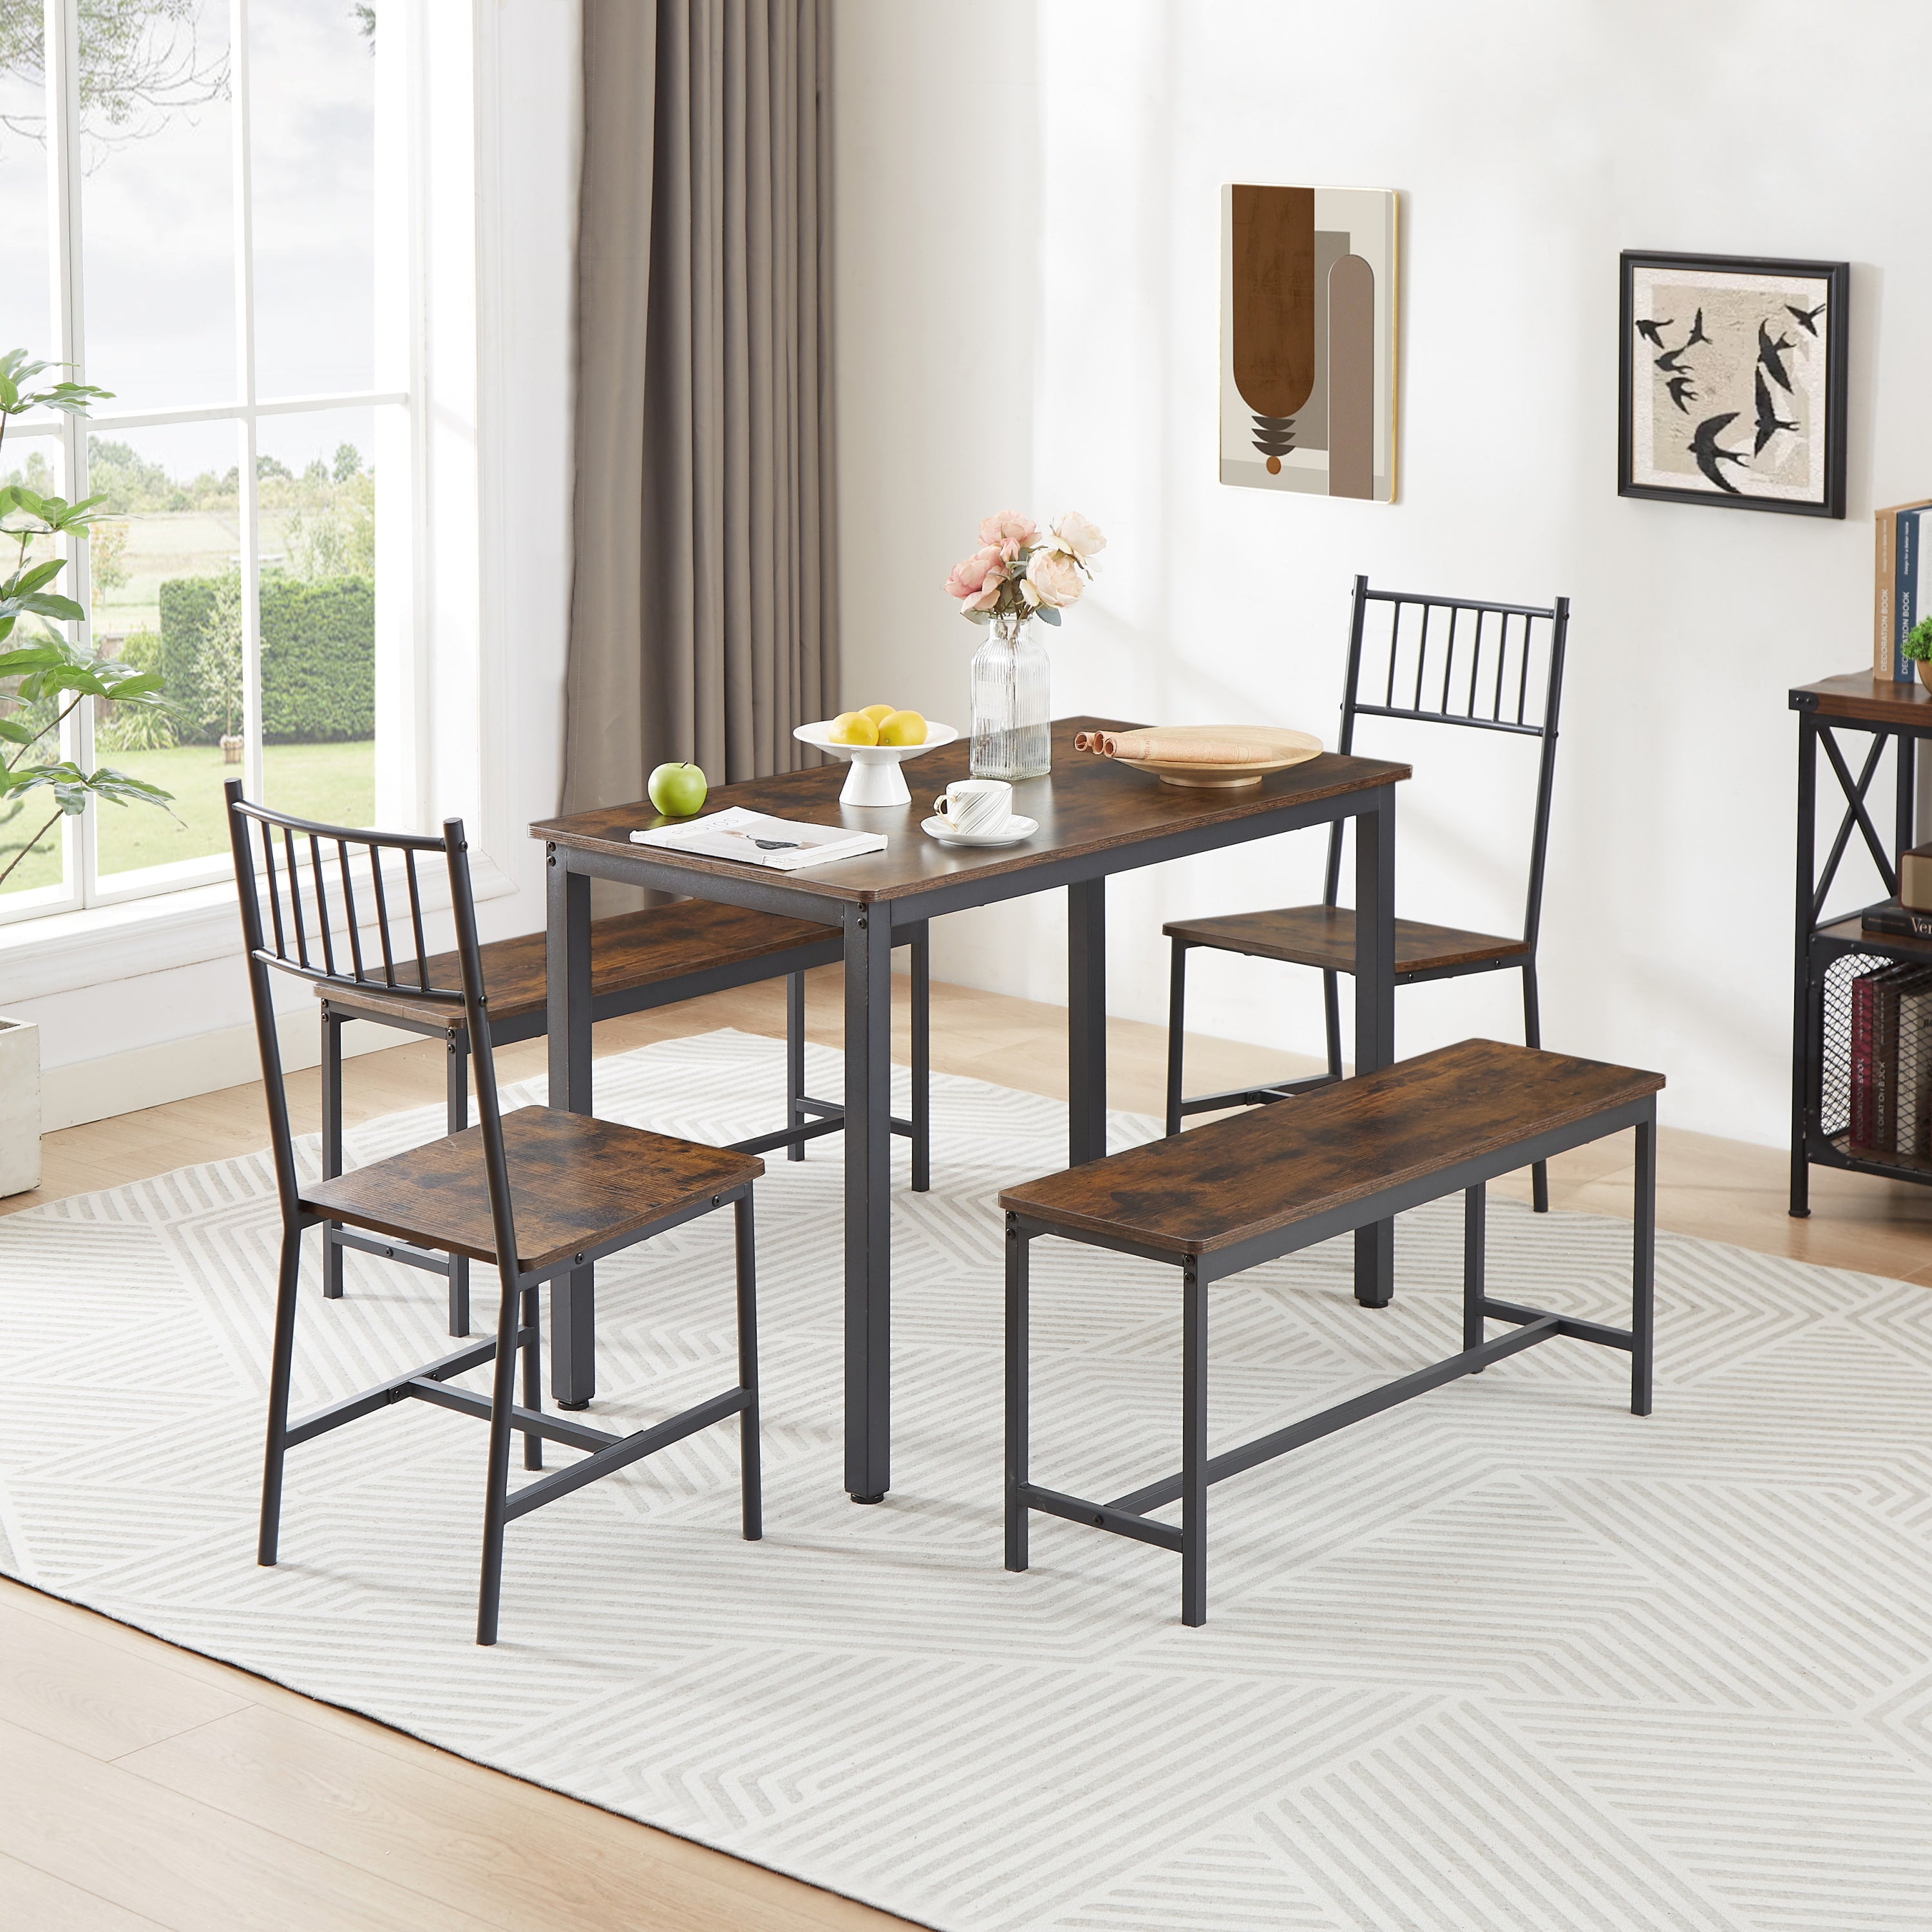 🆓🚛 Dining Table Set, Barstool Dining Table With 2 Benches 2 Back Chairs, Industrial Dining Table for Kitchen Breakfast Table, Living Room, Party Room, Rustic Brown and Black, 43.3″L X 23.6″W X 29.9″H